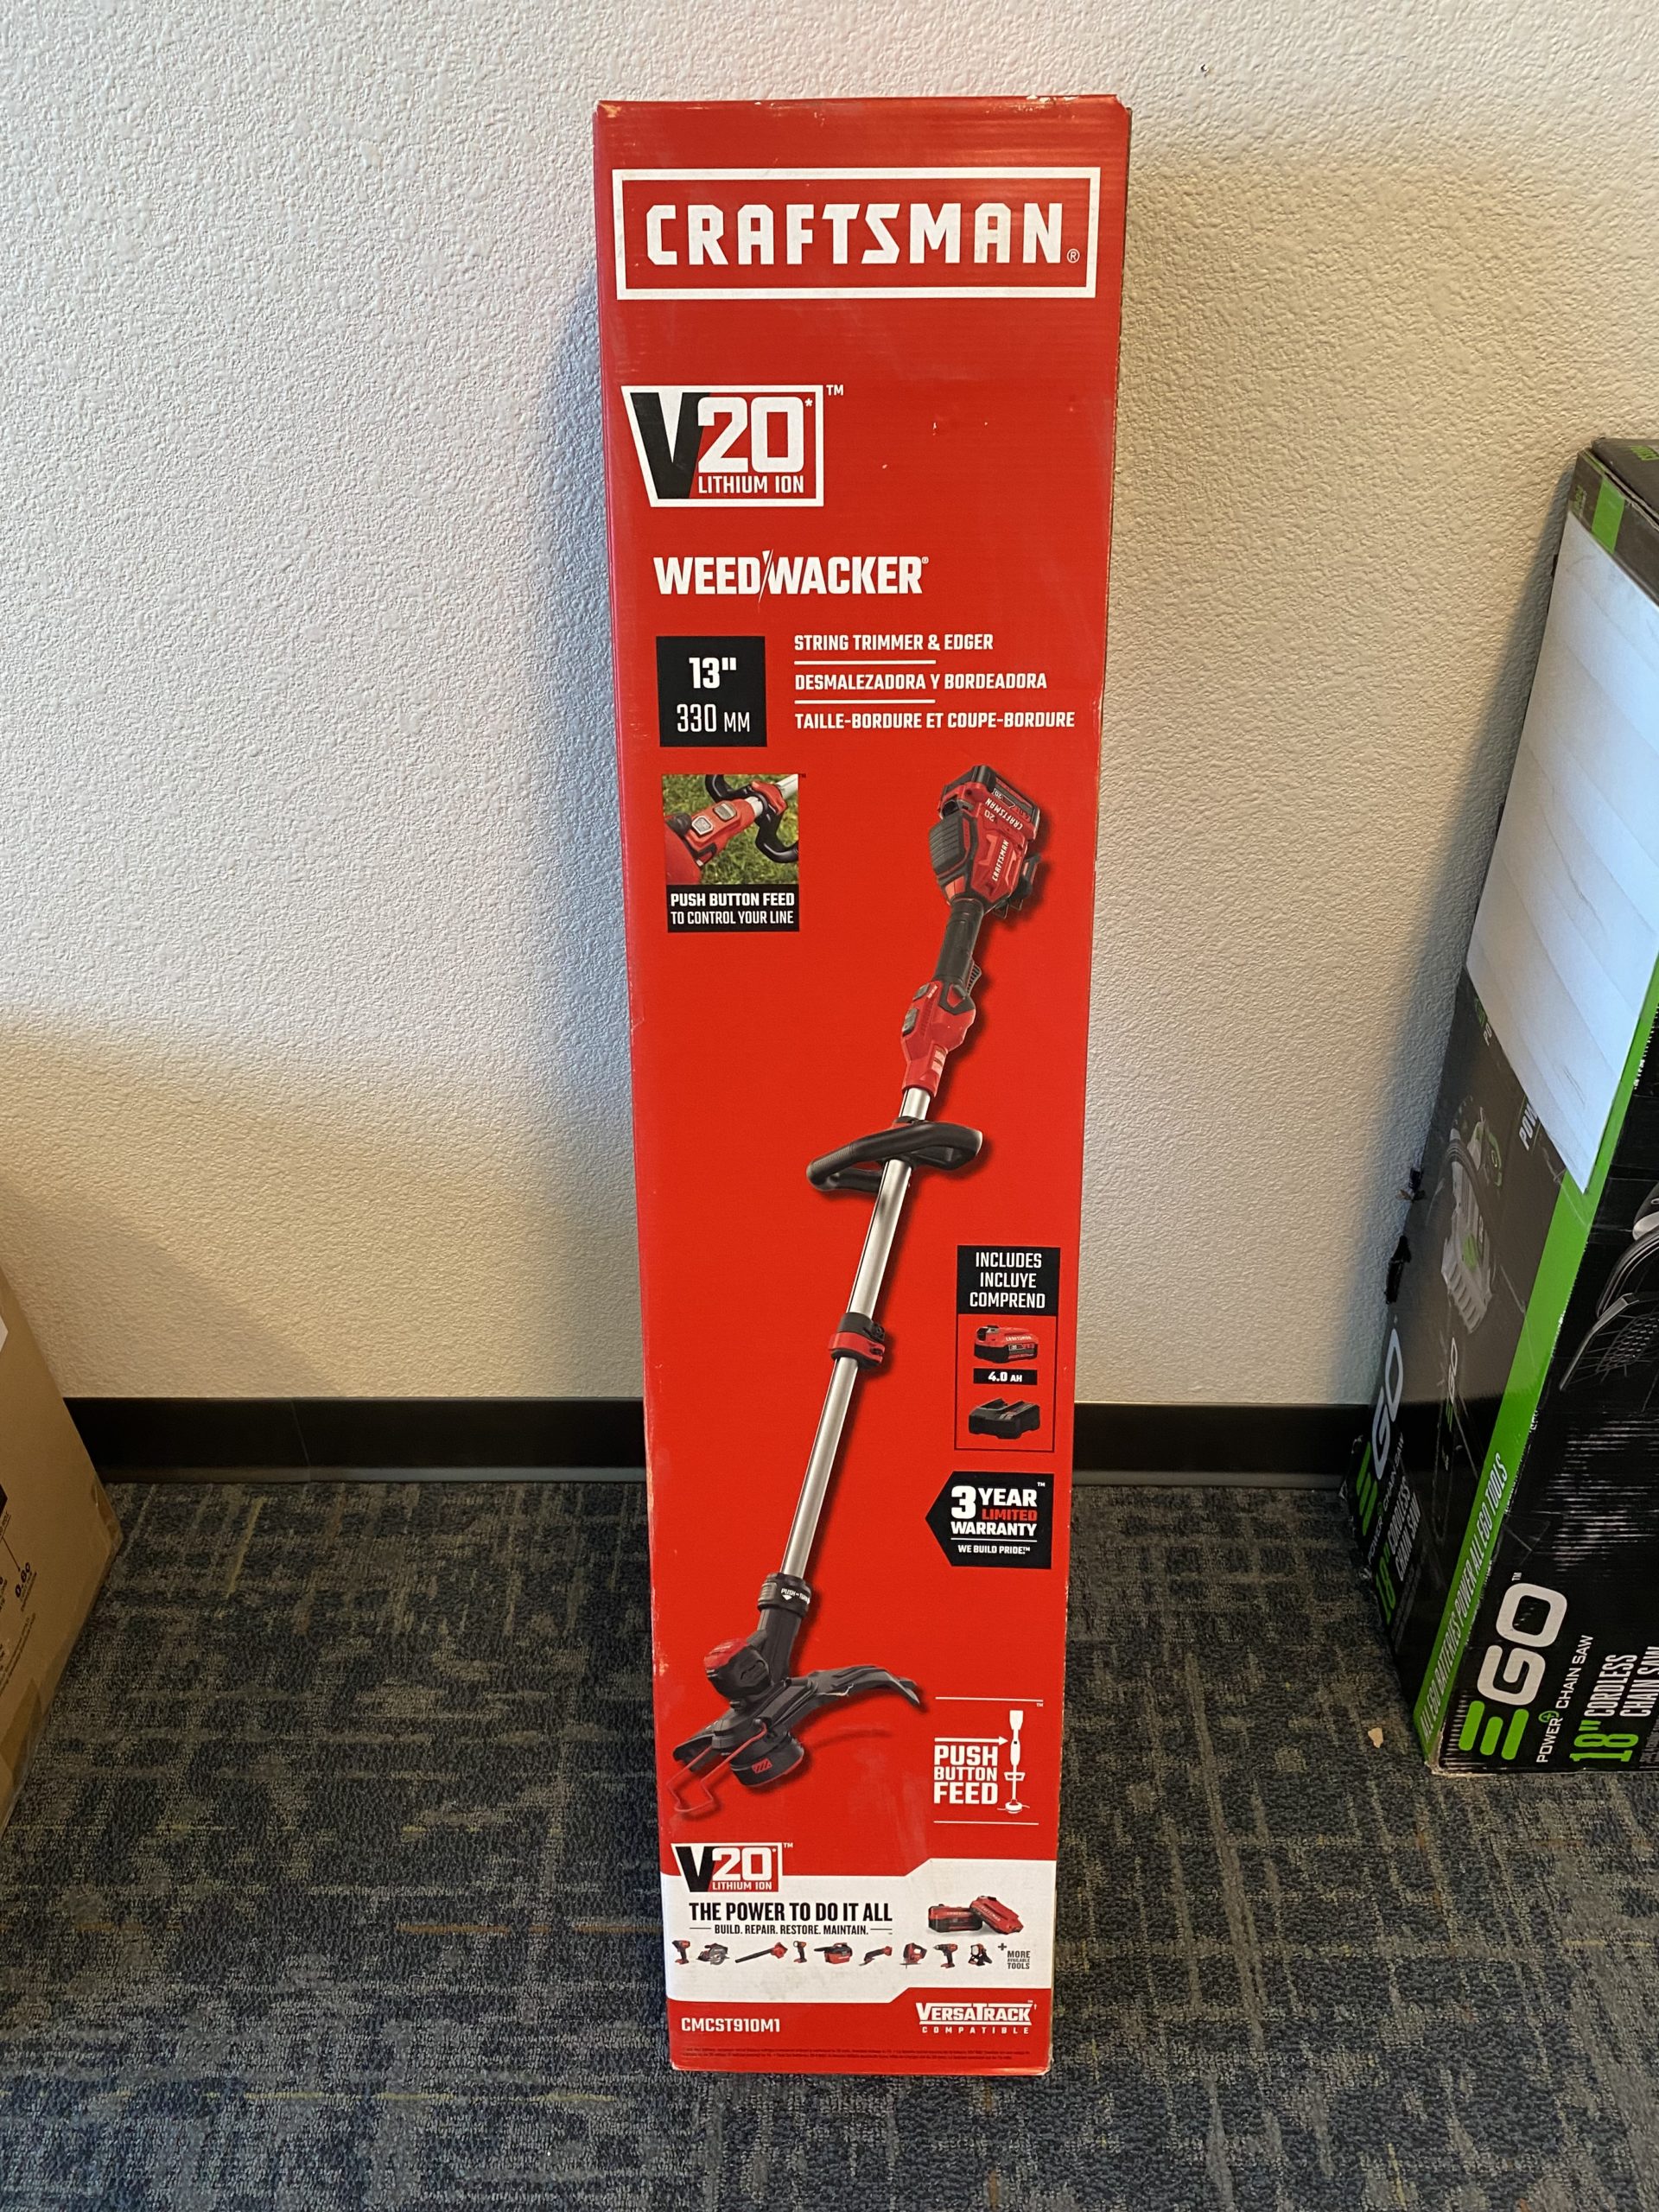 Craftsman electric weed wacker, purchased from Greenhorn Valley Ace Hardware, 6850 CO-165, Colorado City, Colorado.